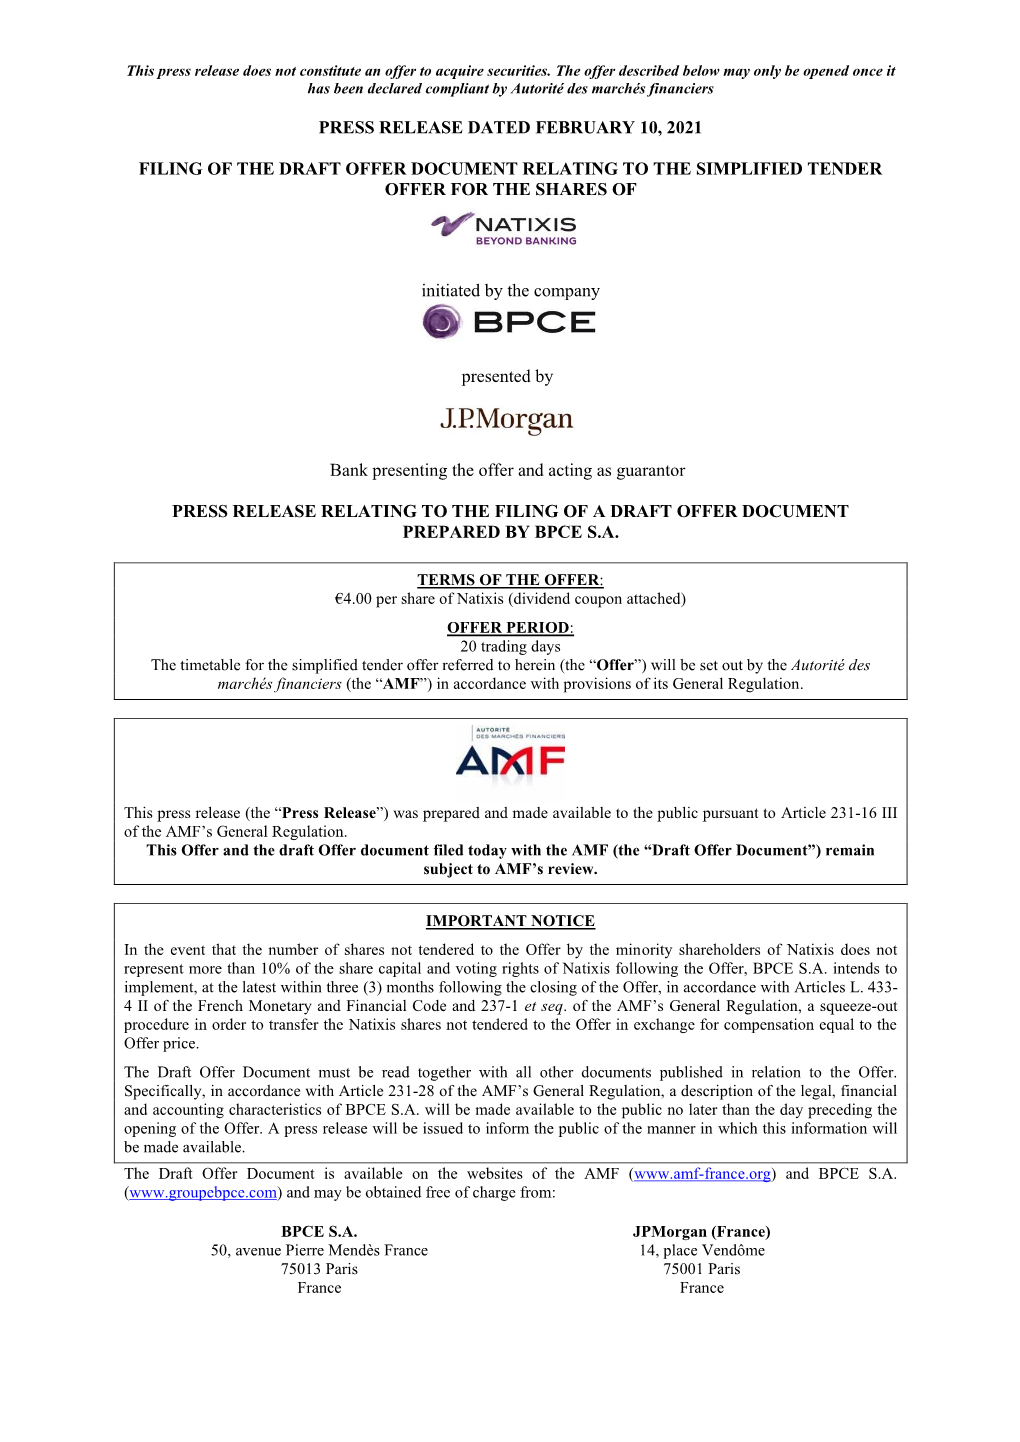 Tender Offer of BPCE on Natixis – Press Release Relating to The